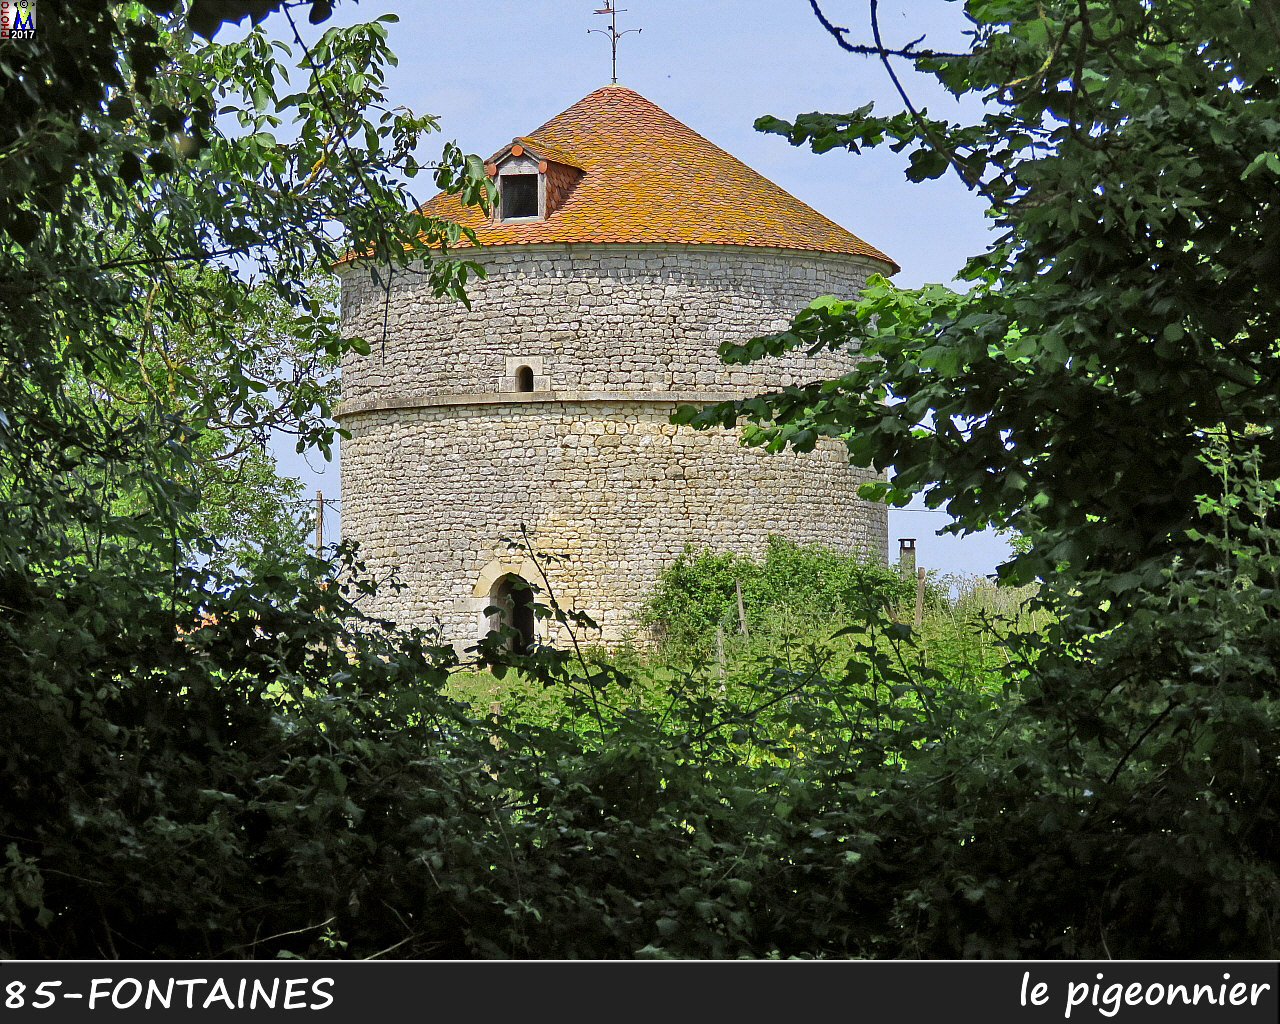 85FONTAINES_pigeonnier_1002.jpg